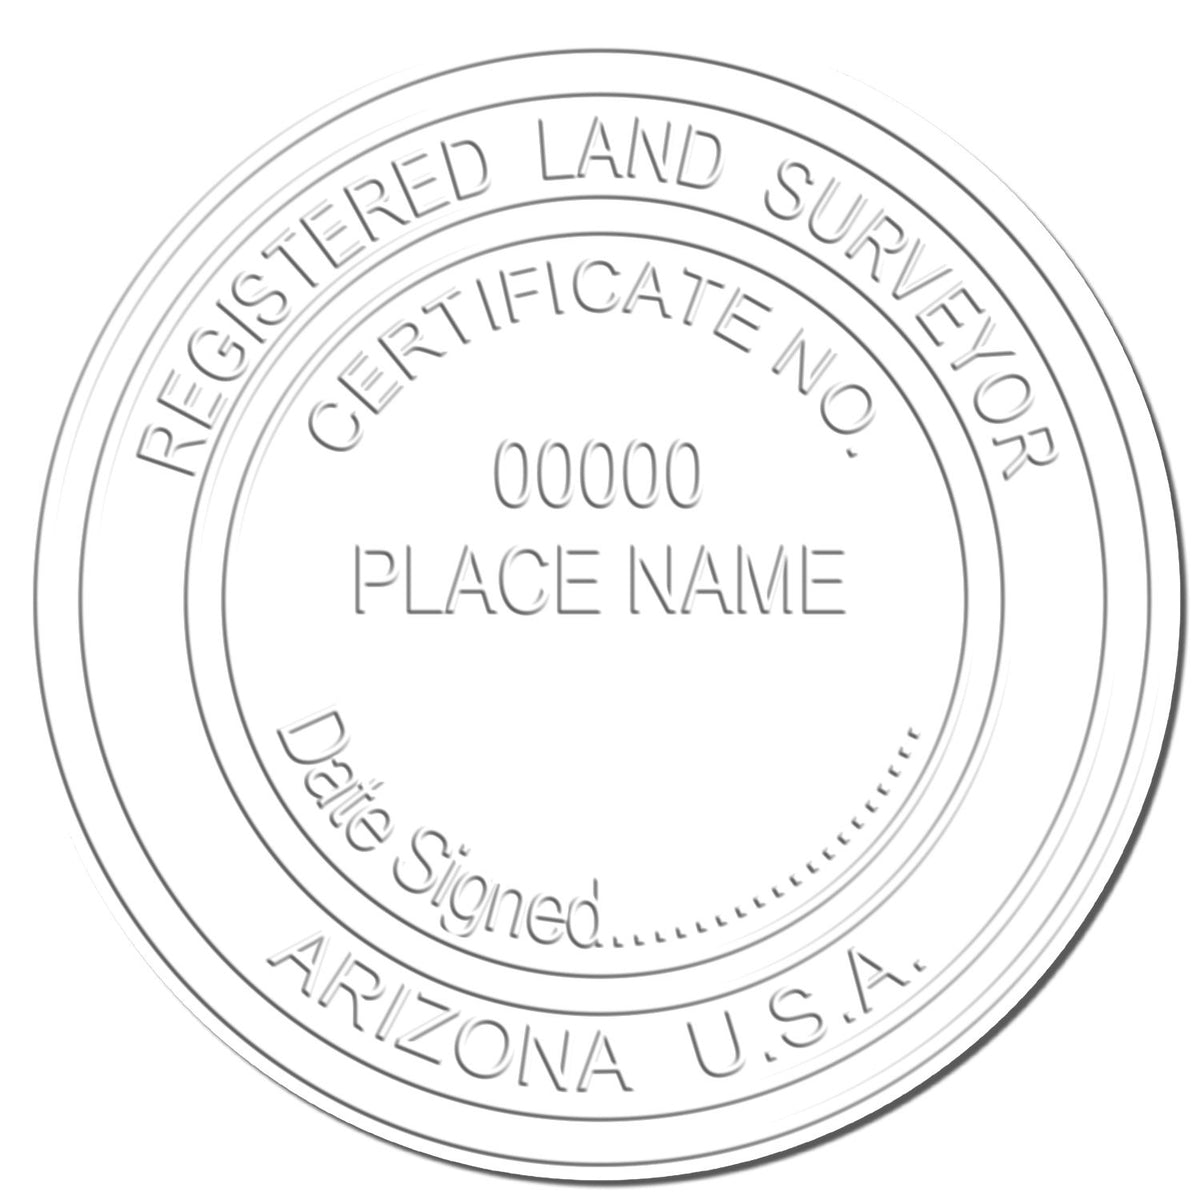 This paper is stamped with a sample imprint of the Hybrid Arizona Land Surveyor Seal, signifying its quality and reliability.